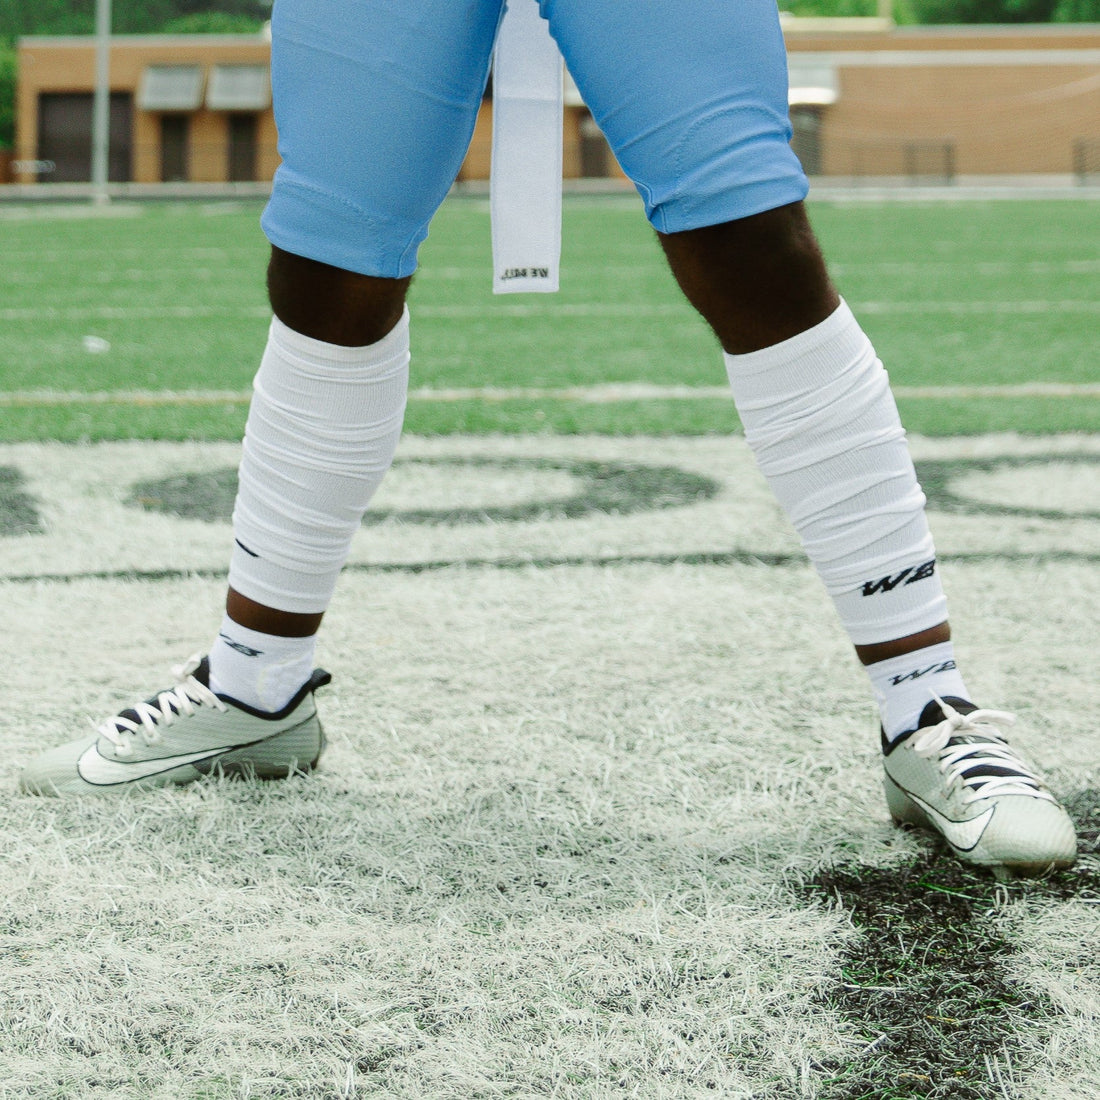 How do football leg sleeves help with player protection? – We Ball Sports